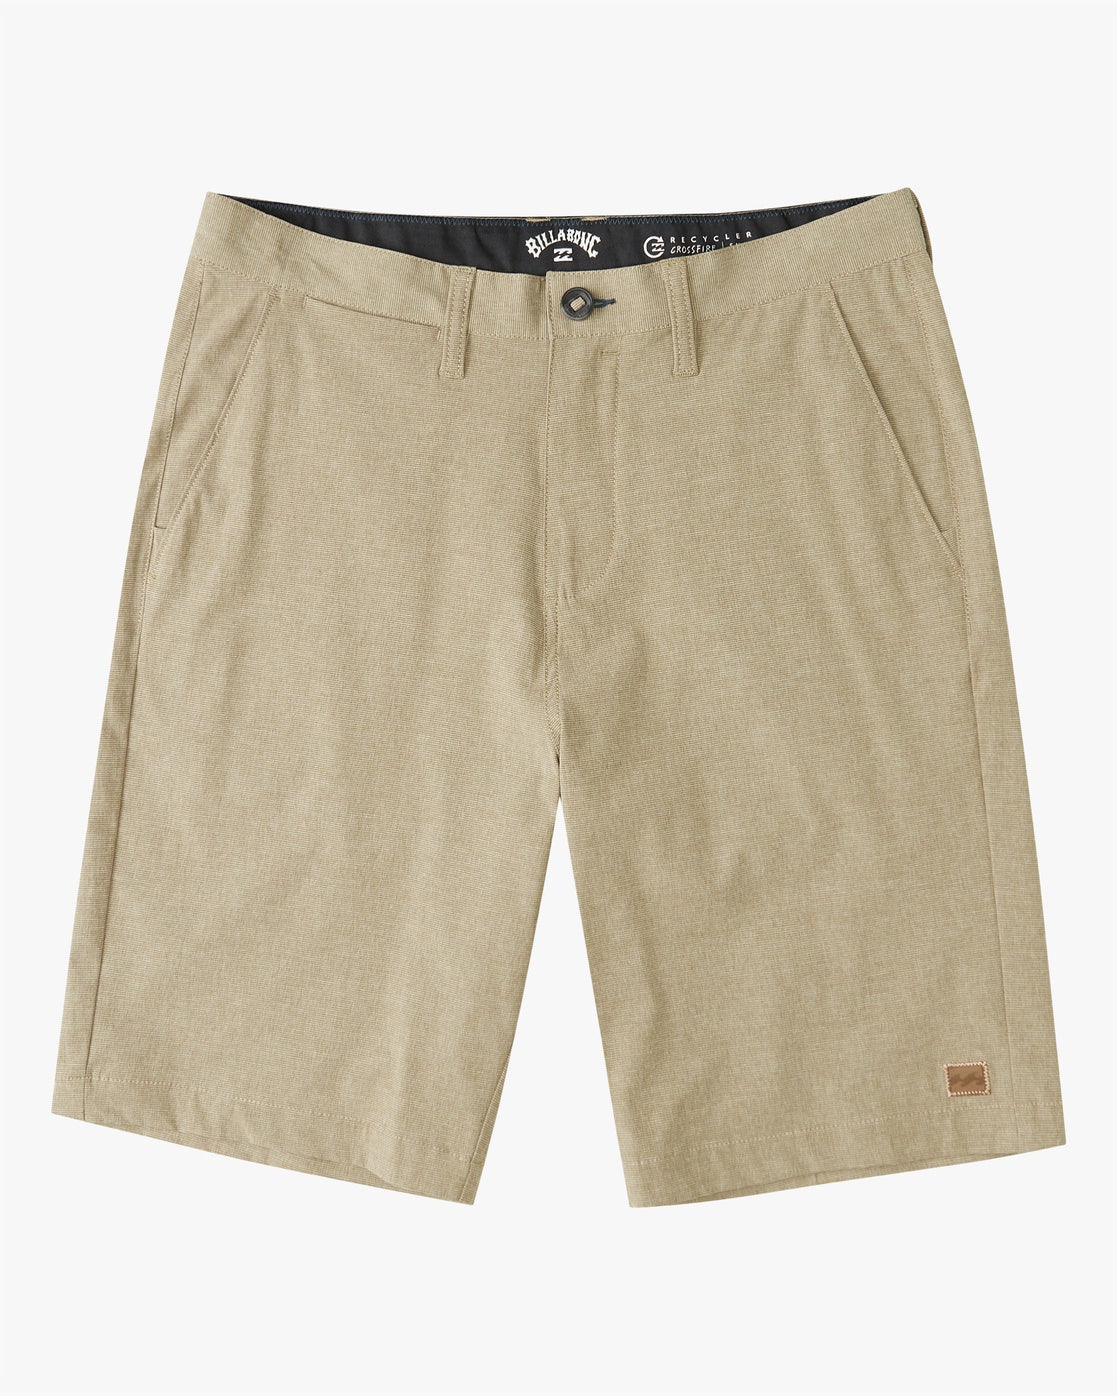 Crossfire Submersible Shorts 21"